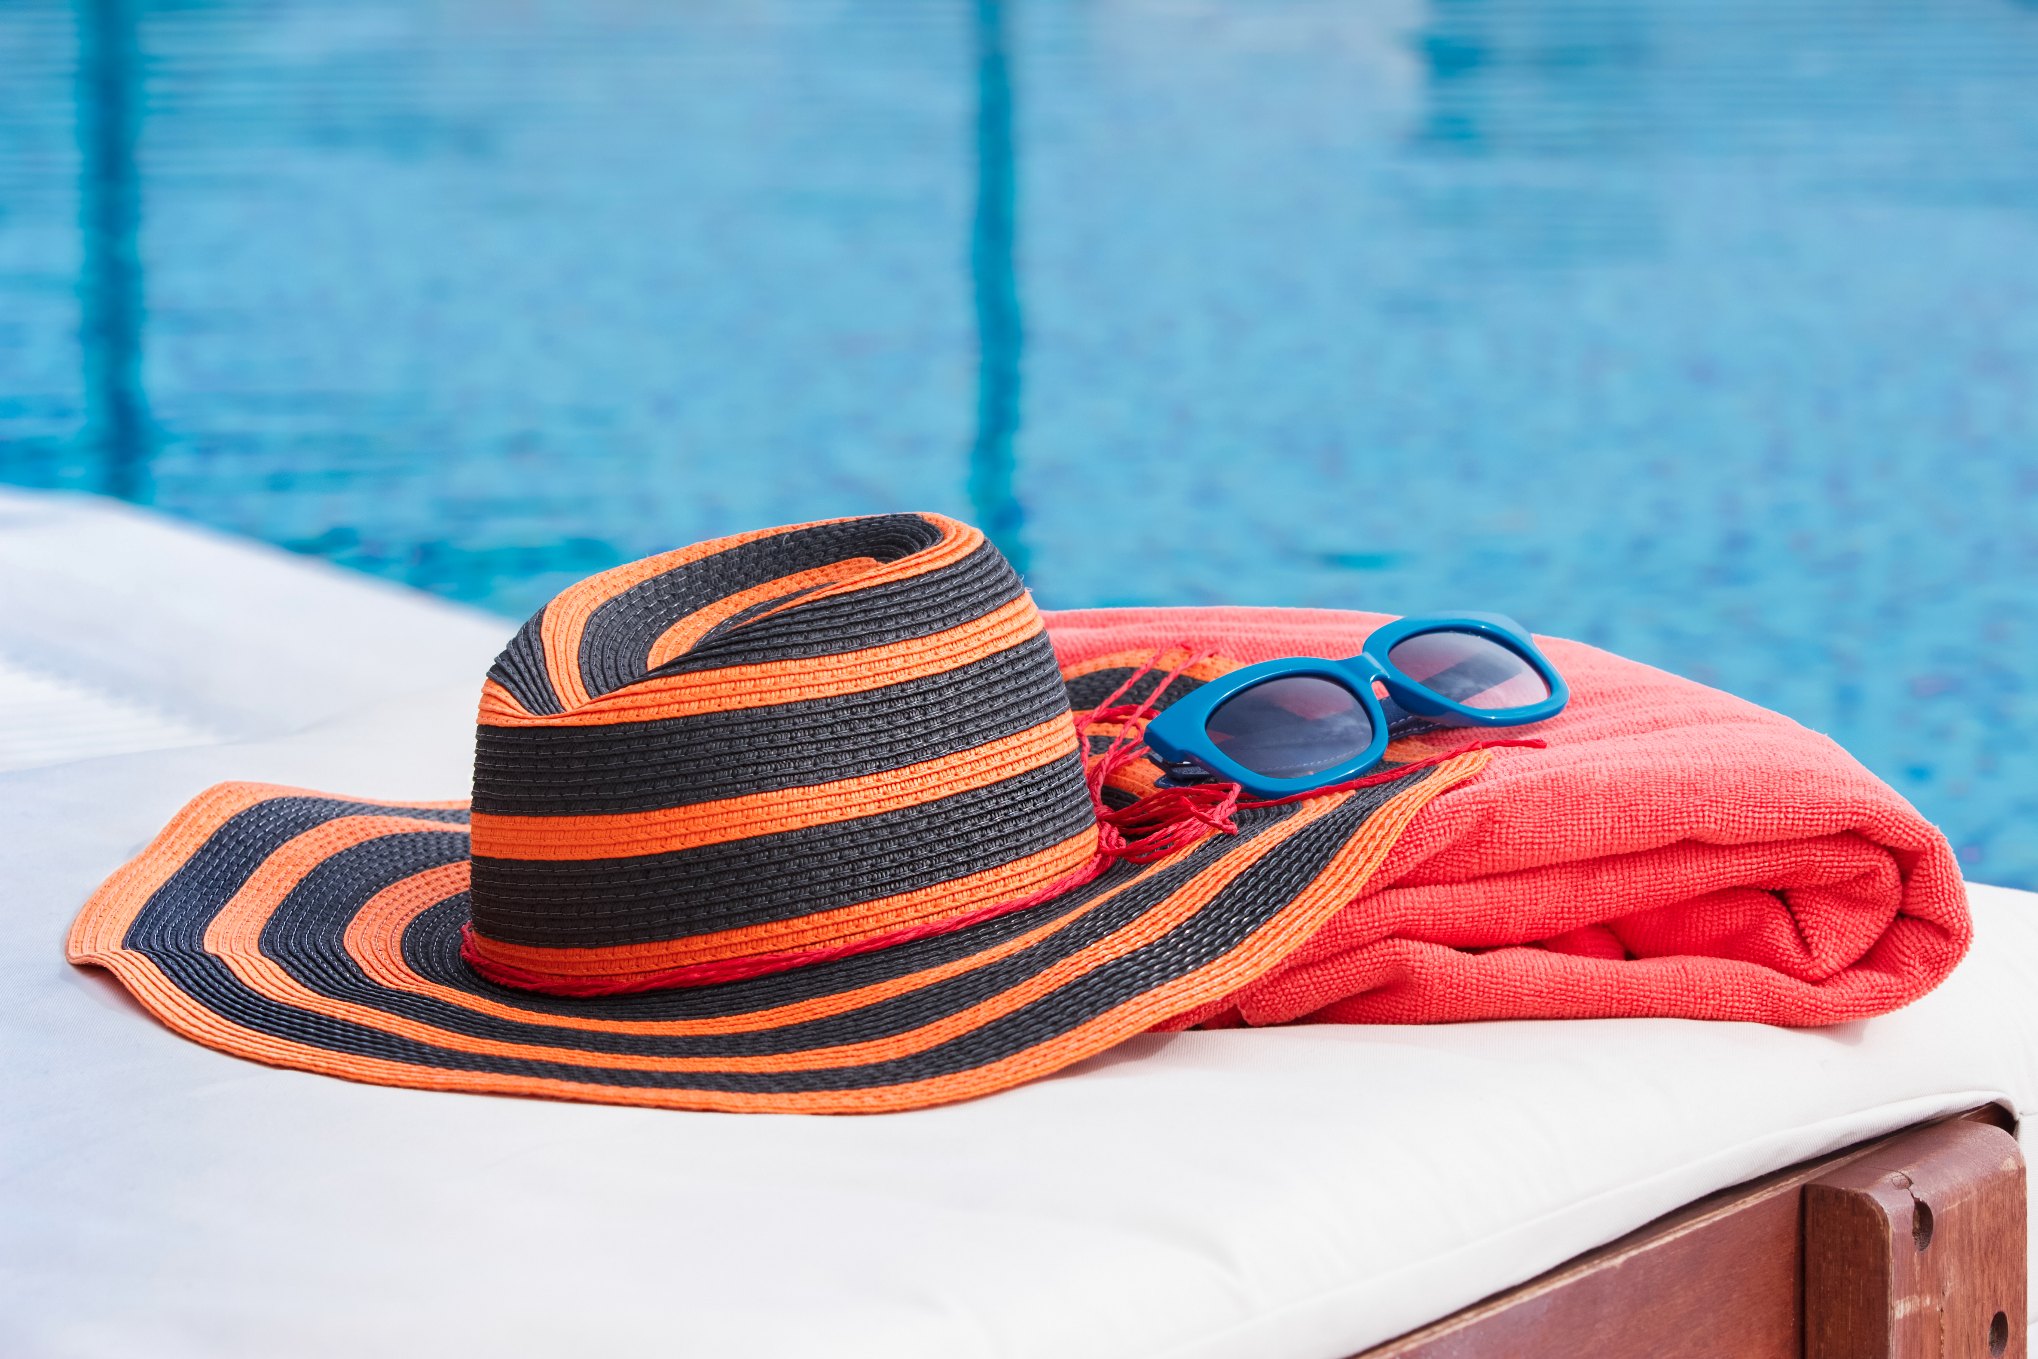 POOL SIDE WITH TOWEL AND A HAT